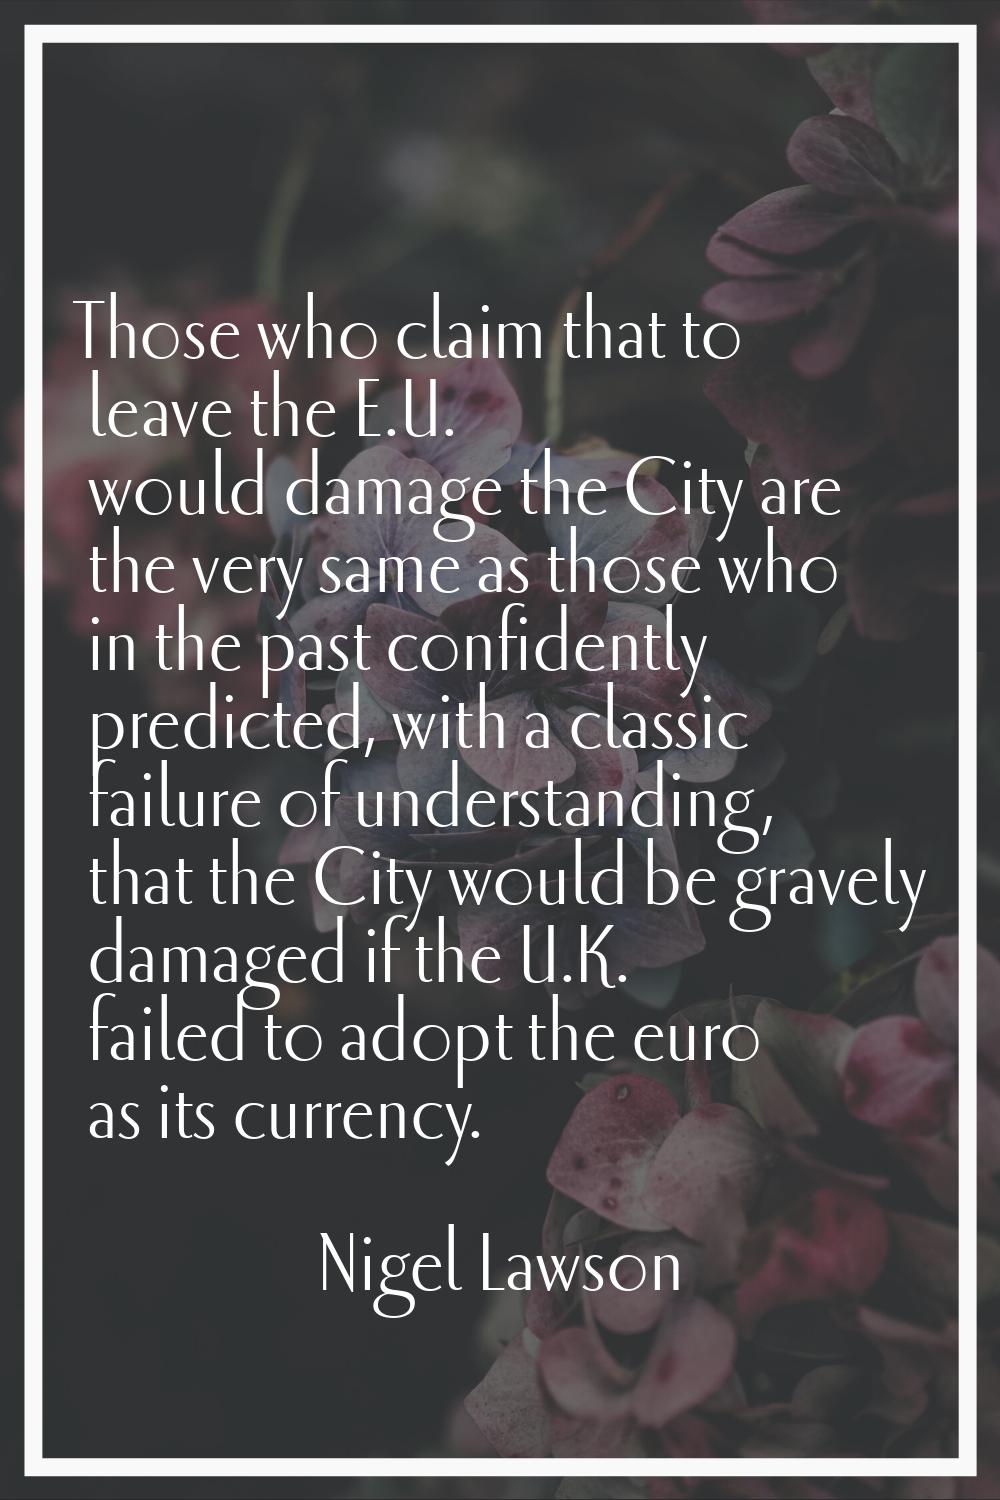 Those who claim that to leave the E.U. would damage the City are the very same as those who in the 